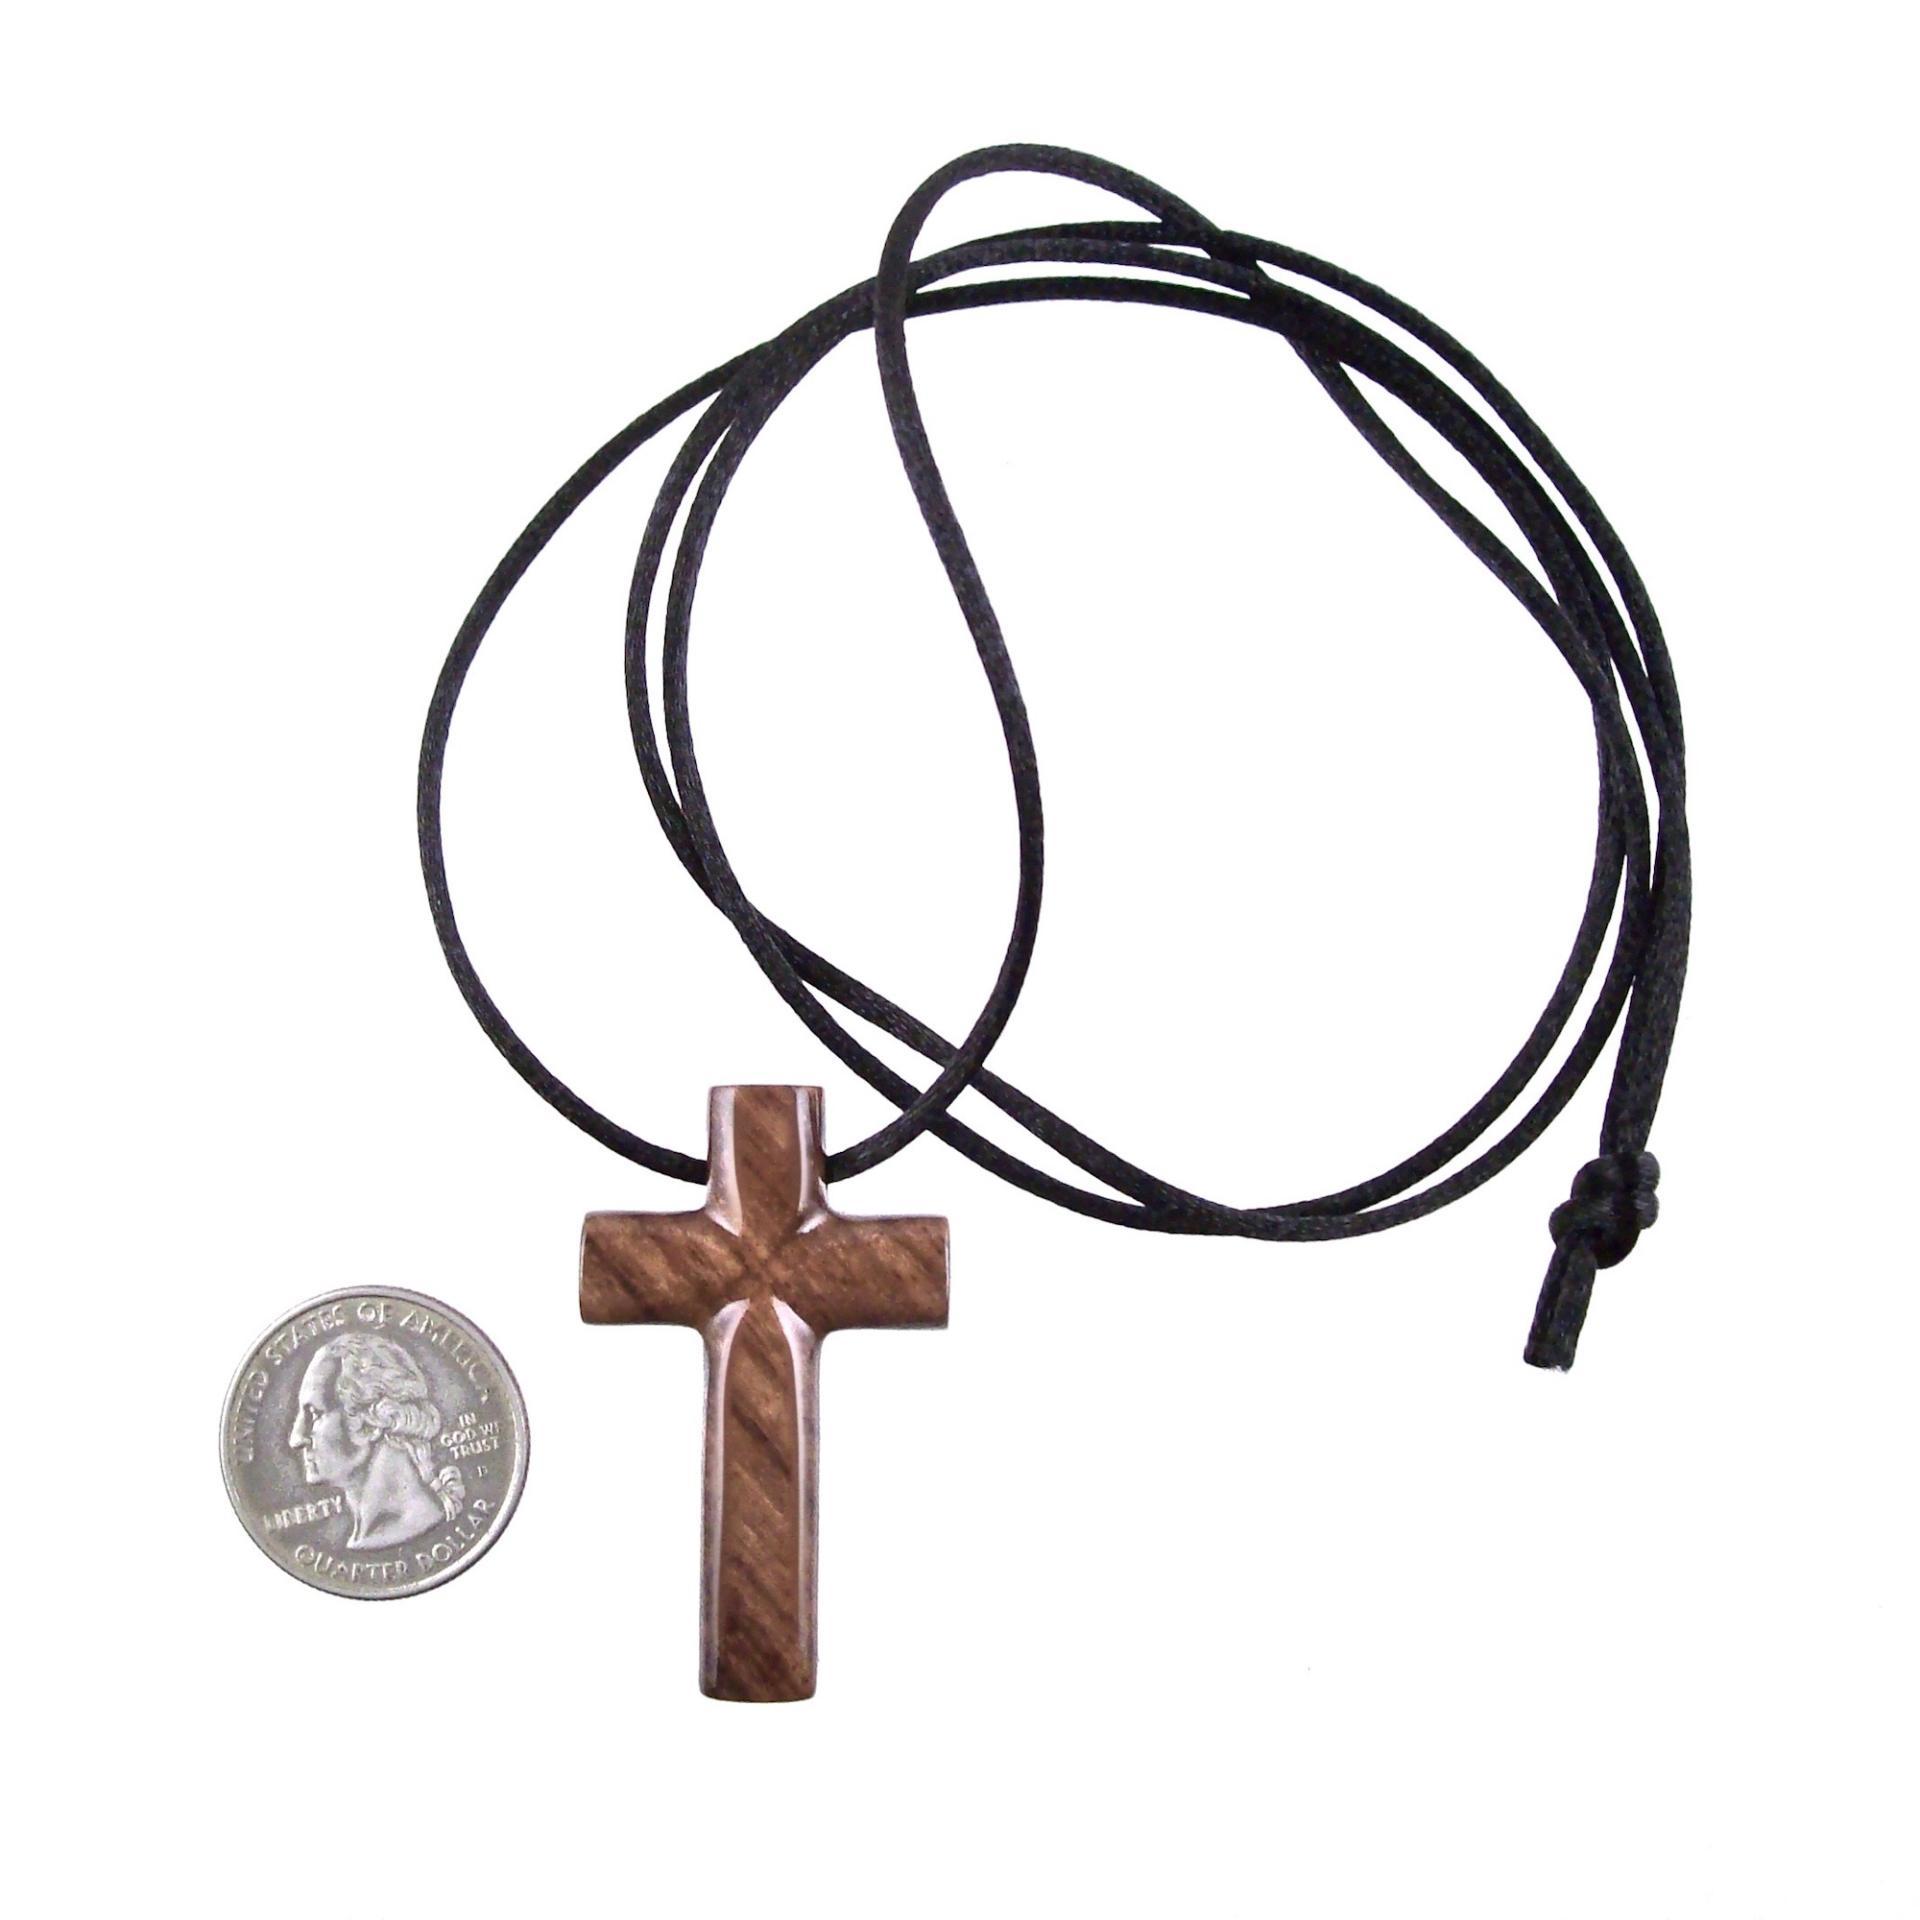 Wooden Cross Necklace, Hand Carved Cross Pendant, Mens Christian Wood Jewelry, One of a Kind Gift for Him